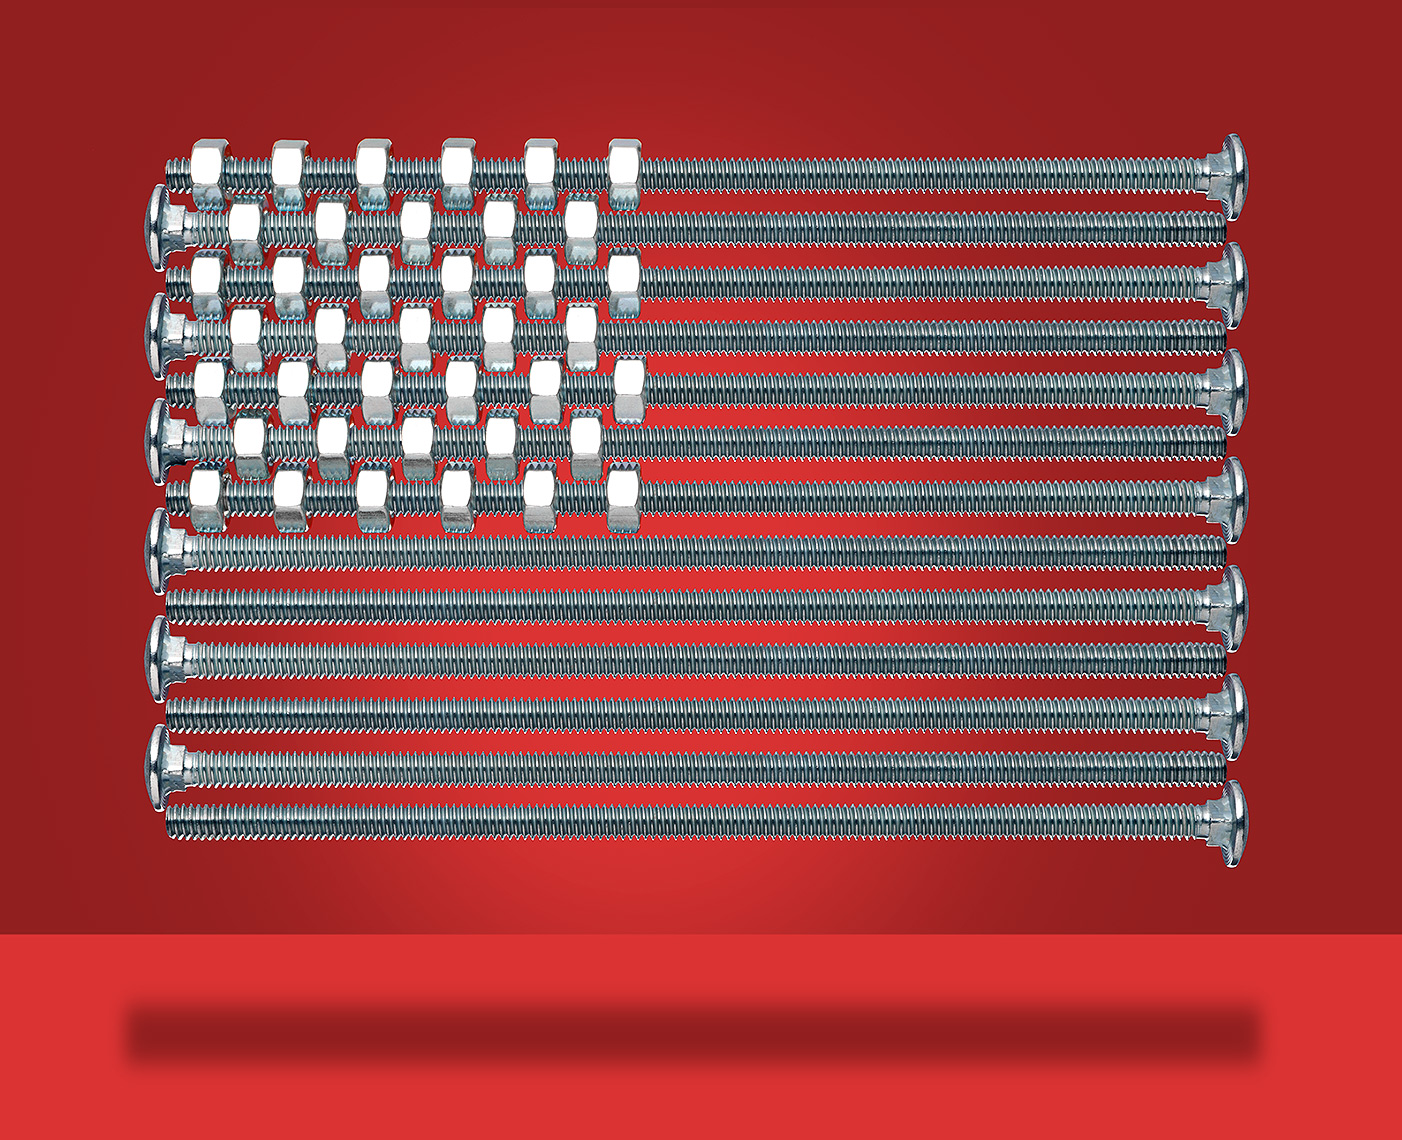 United States flag made of nuts and bolts photo by John Kuczala